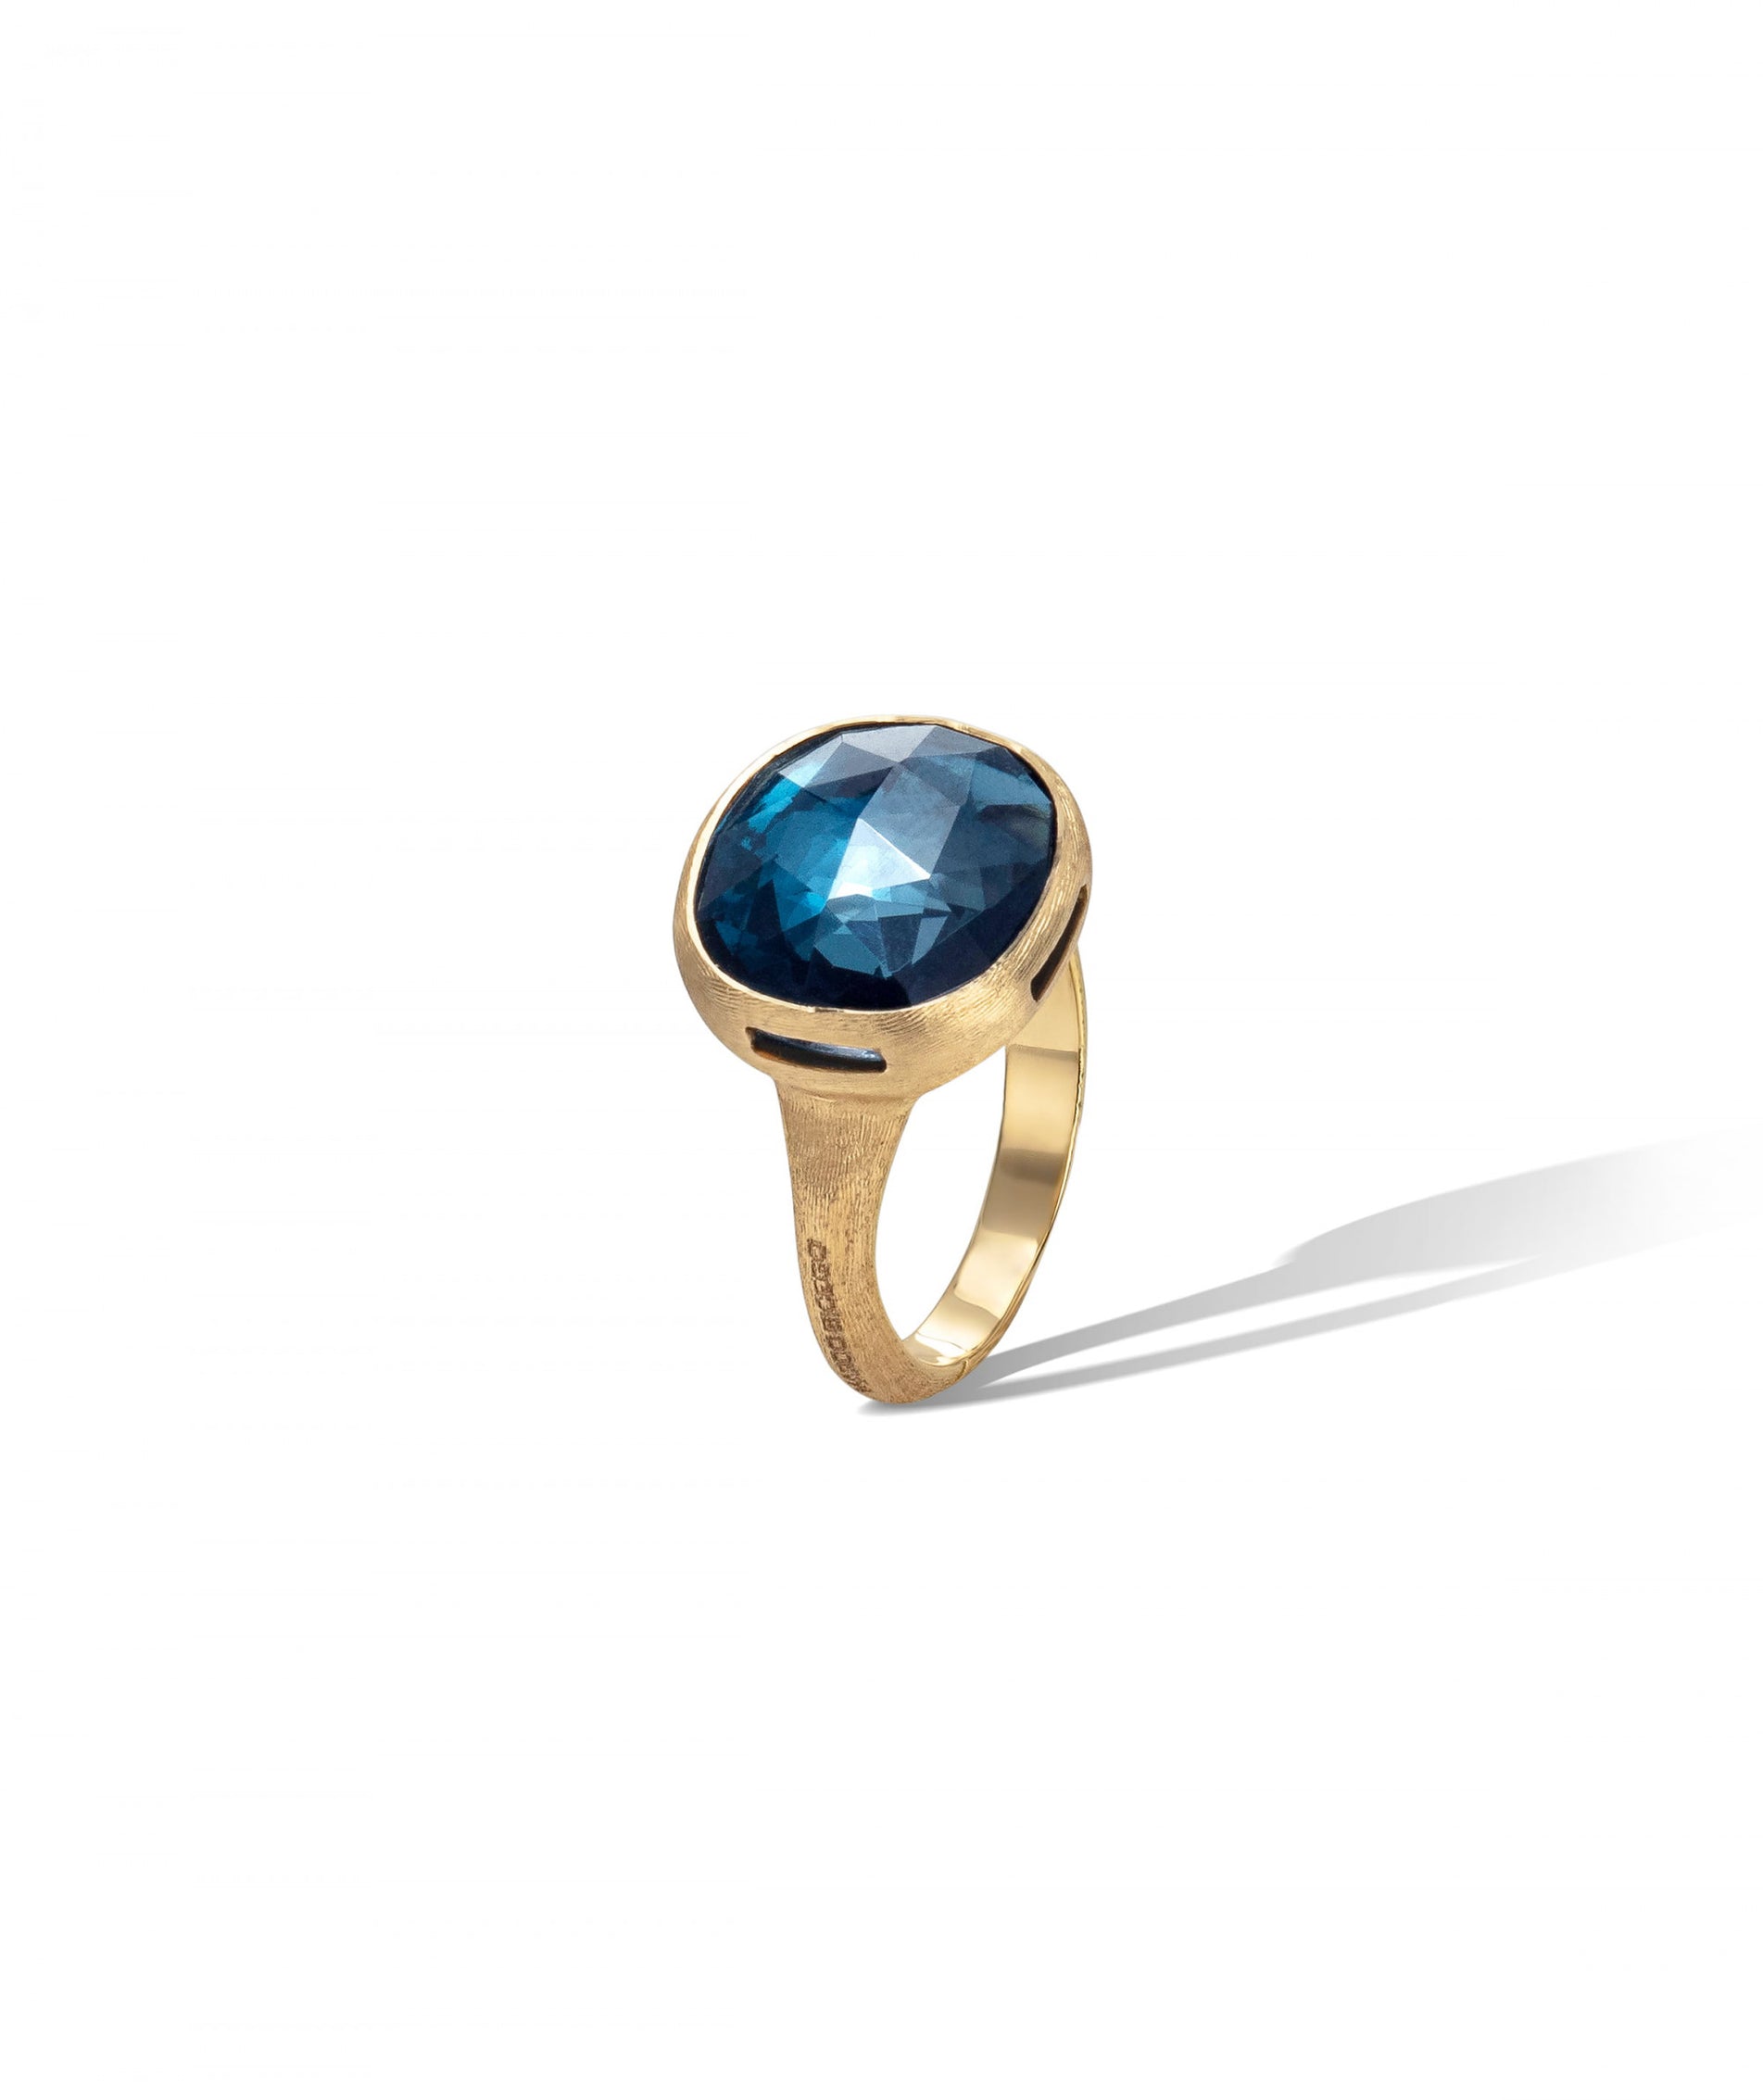 Jaipur Colour Ring in 18k Yellow Gold with London Blue Topaz Large - Orsini Jewellers NZ